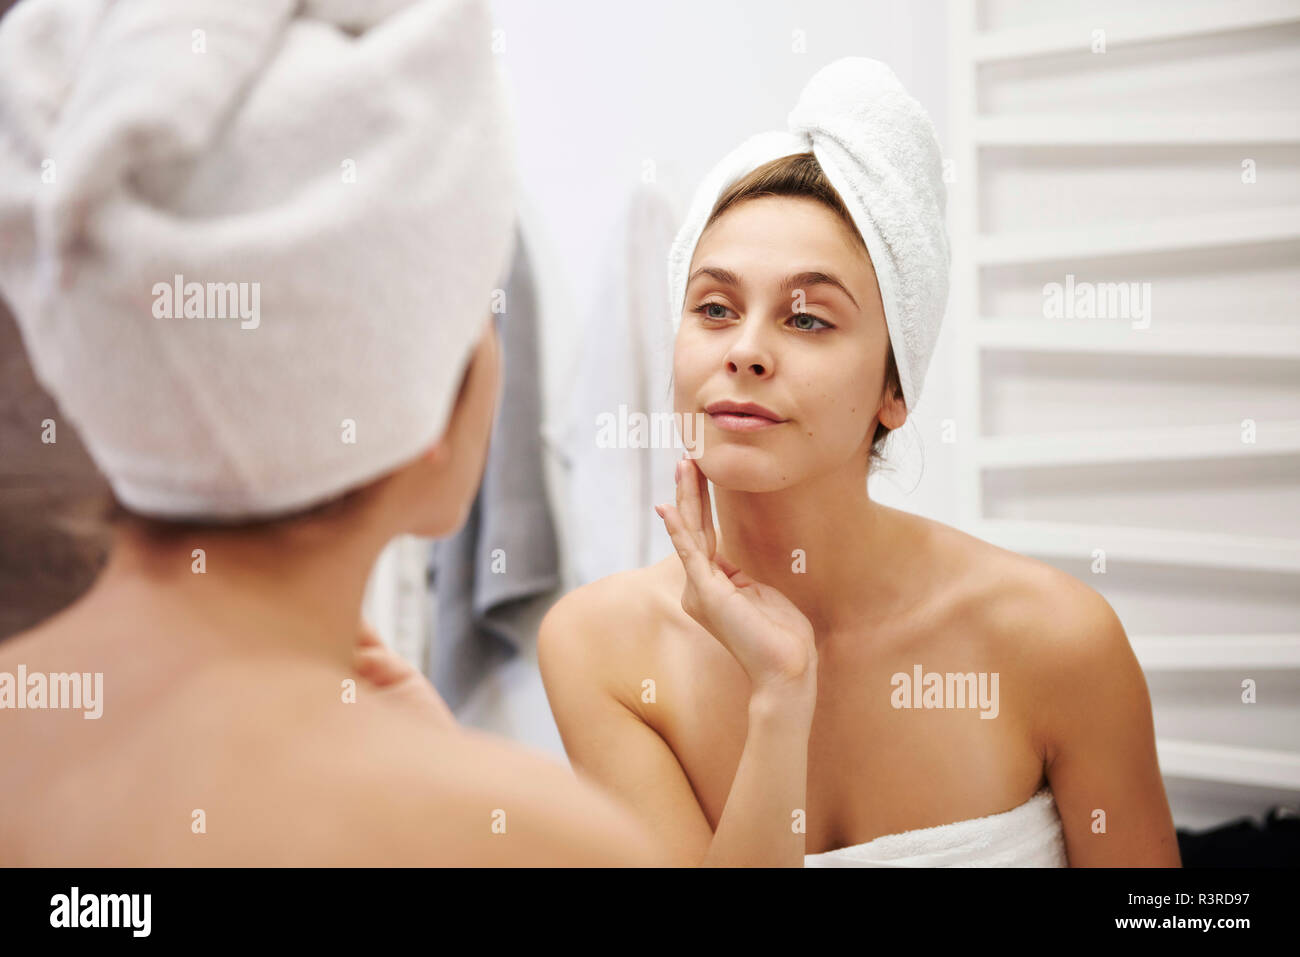 Mirror image of young woman examining her face in the bathroom Stock Photo